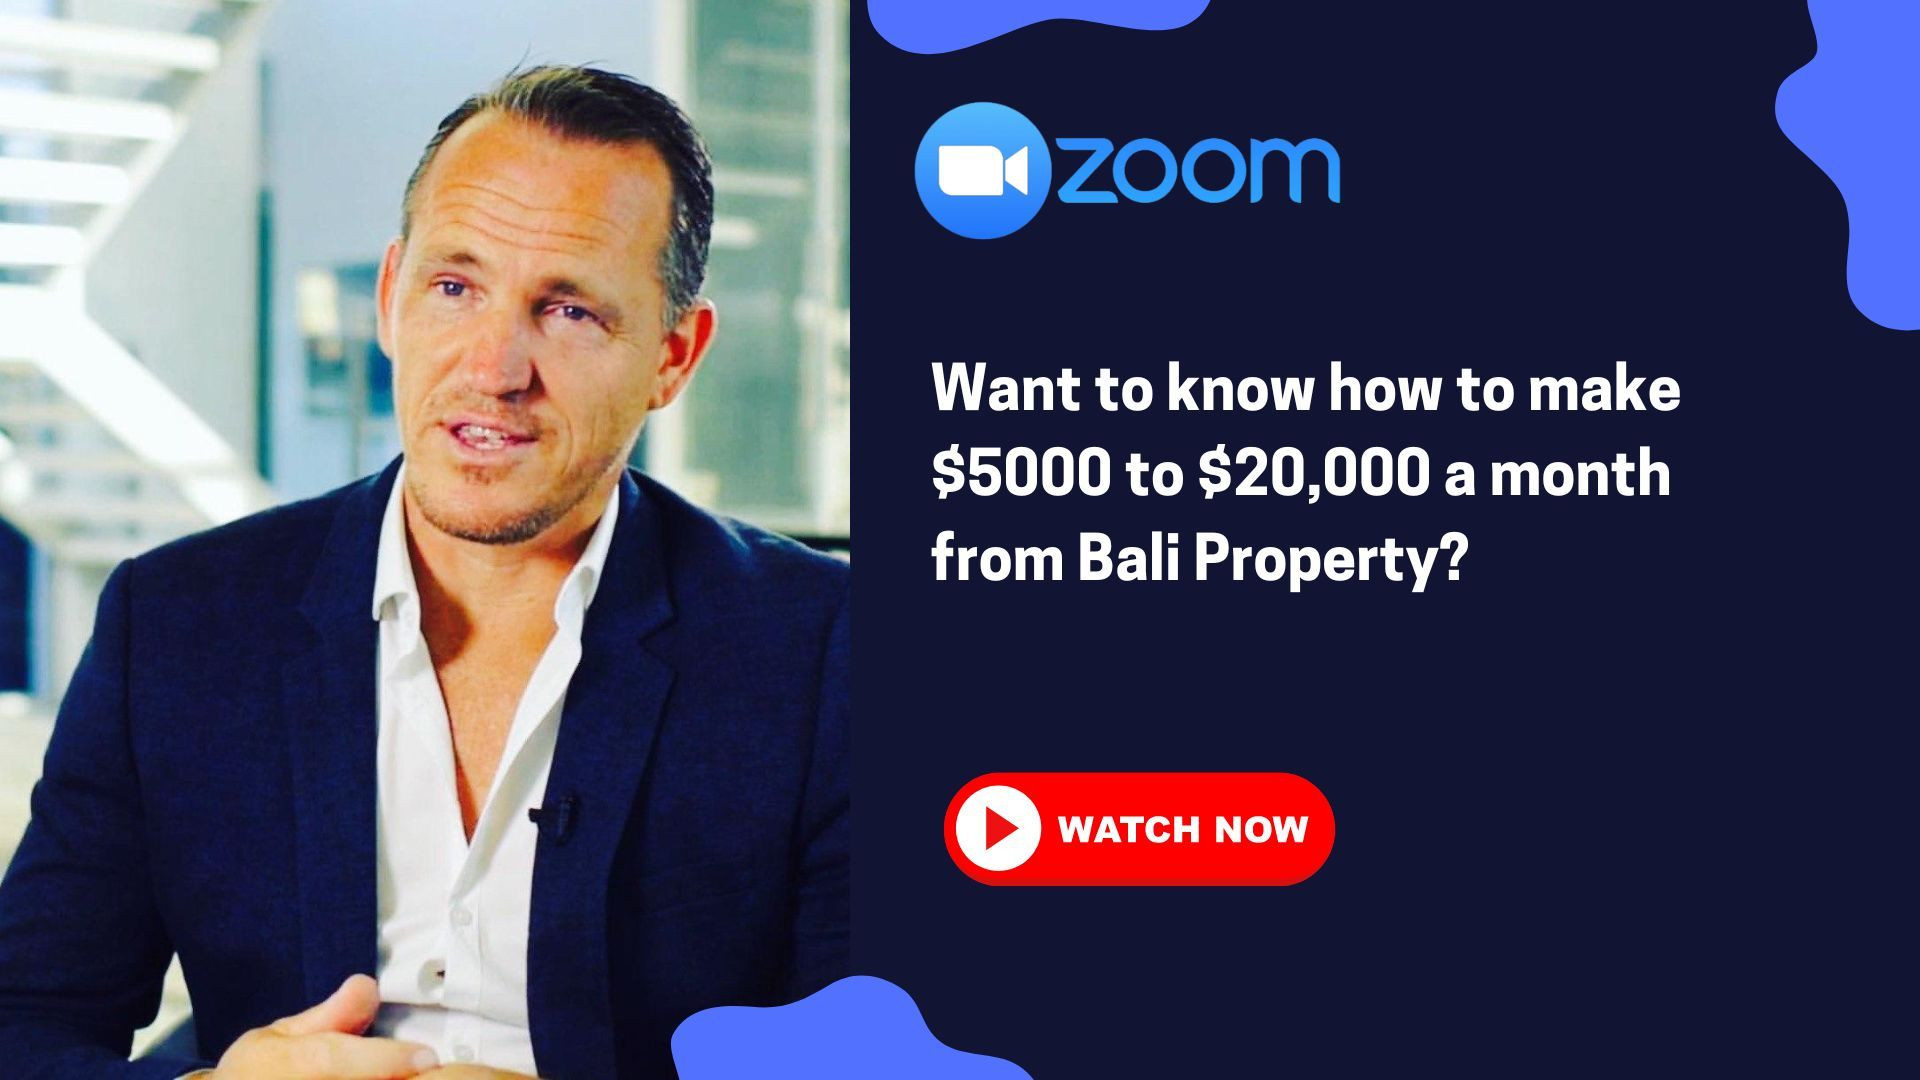 ⁣Want to know how to make $5000 to $20,000 a month from Bali Property?